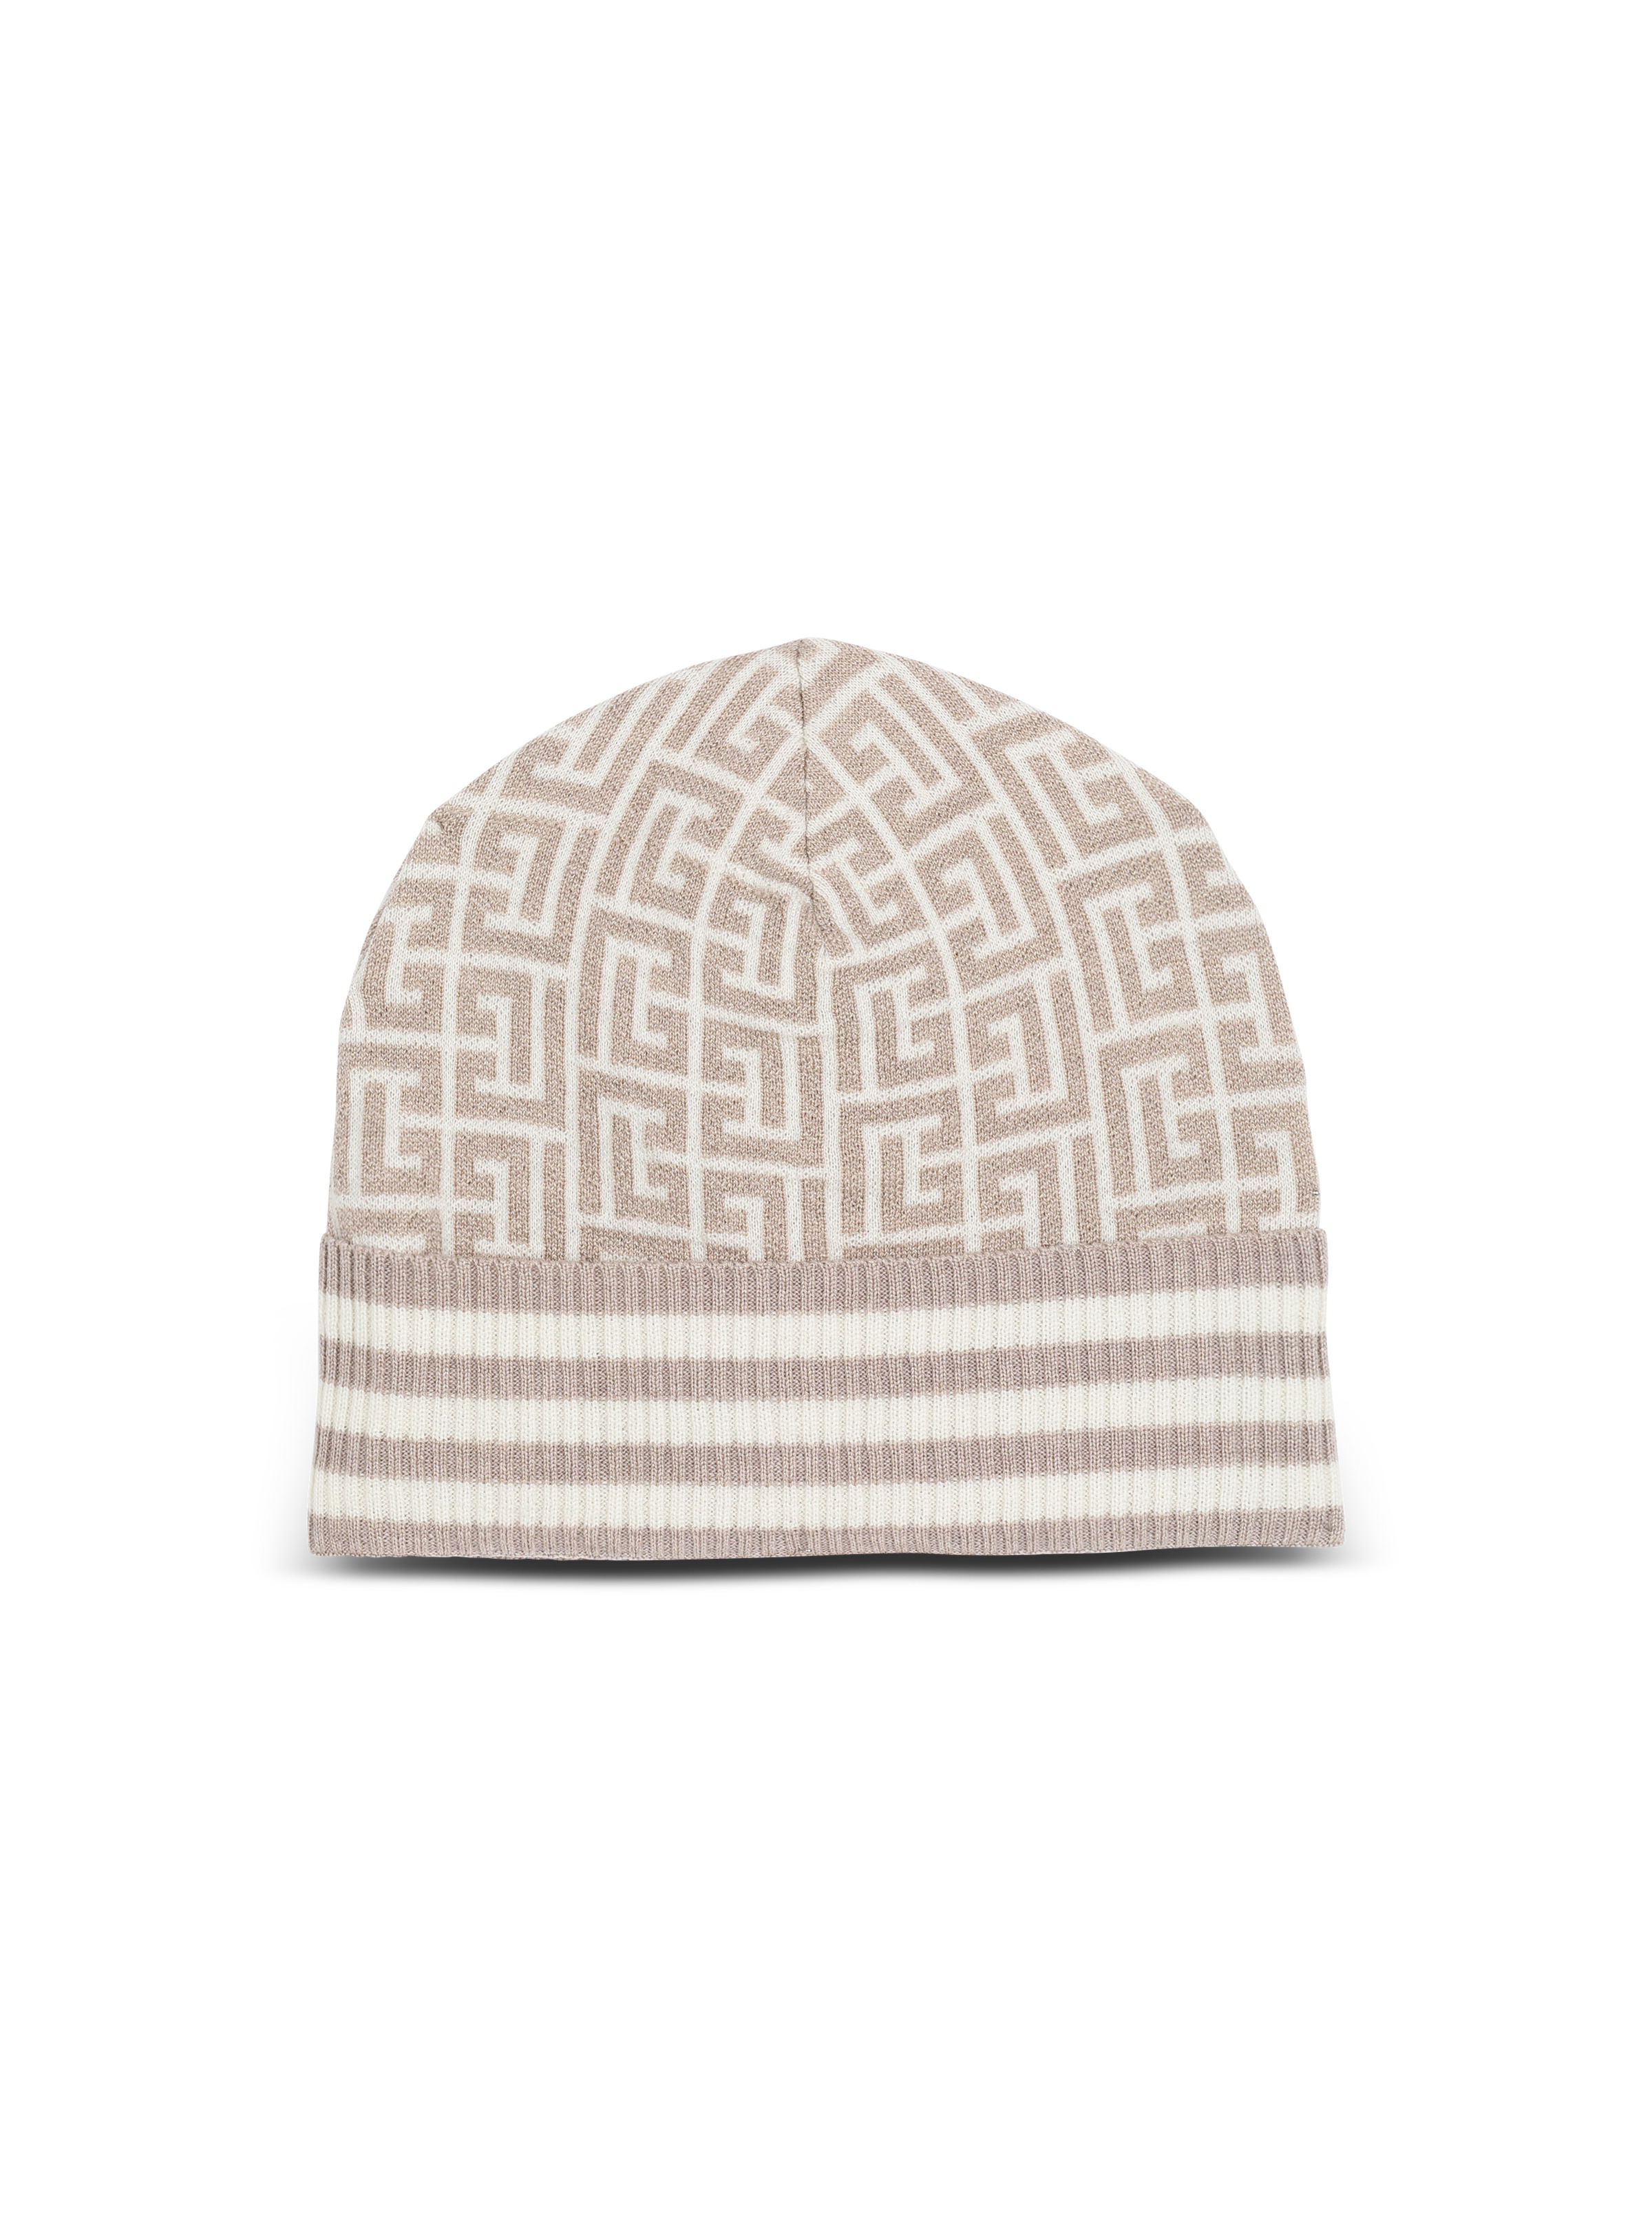 Monogrammed embroidered wool hat - 1